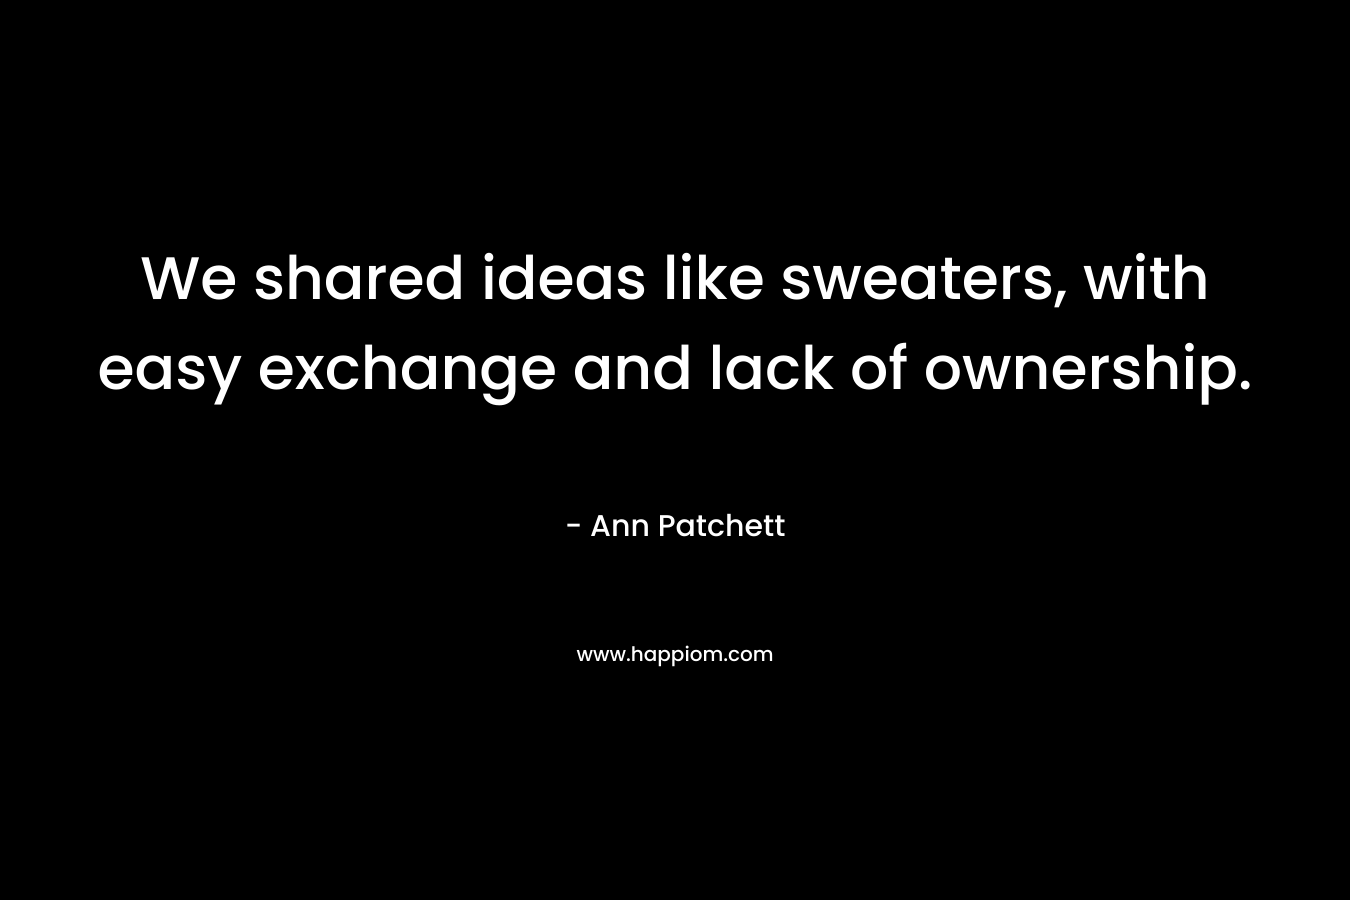 We shared ideas like sweaters, with easy exchange and lack of ownership.